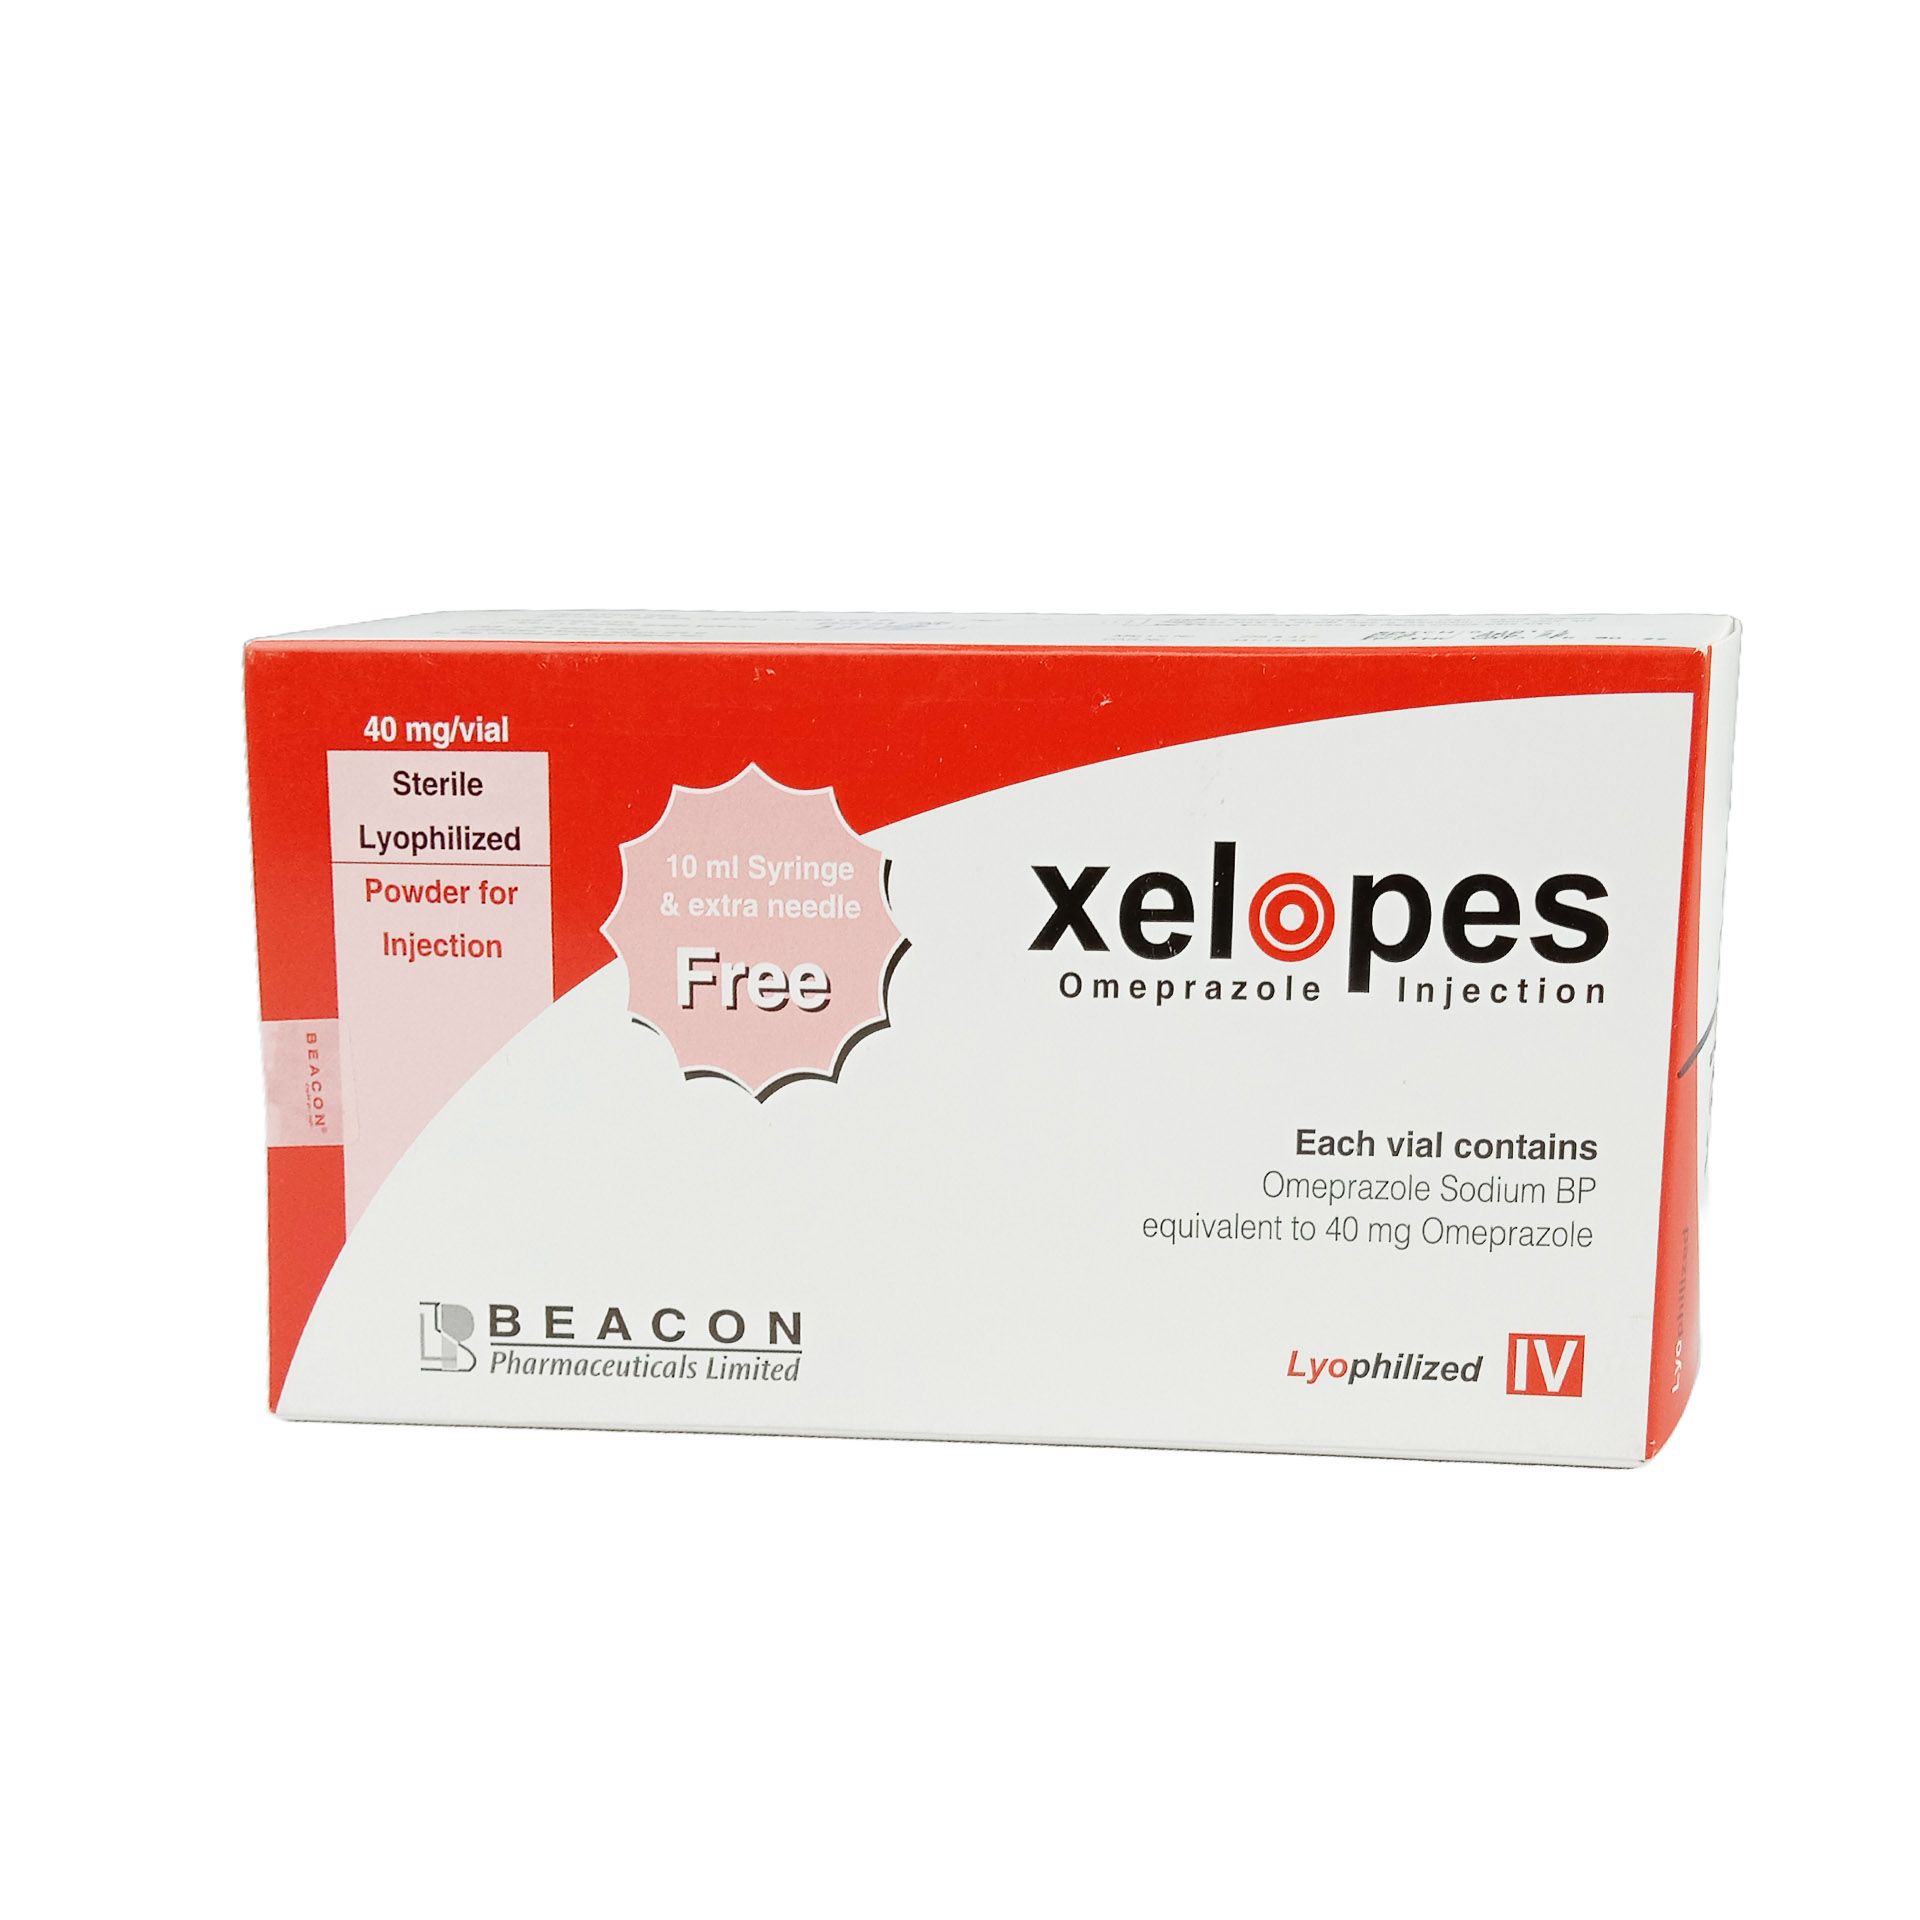 Xelopes 40mg/vial Injection